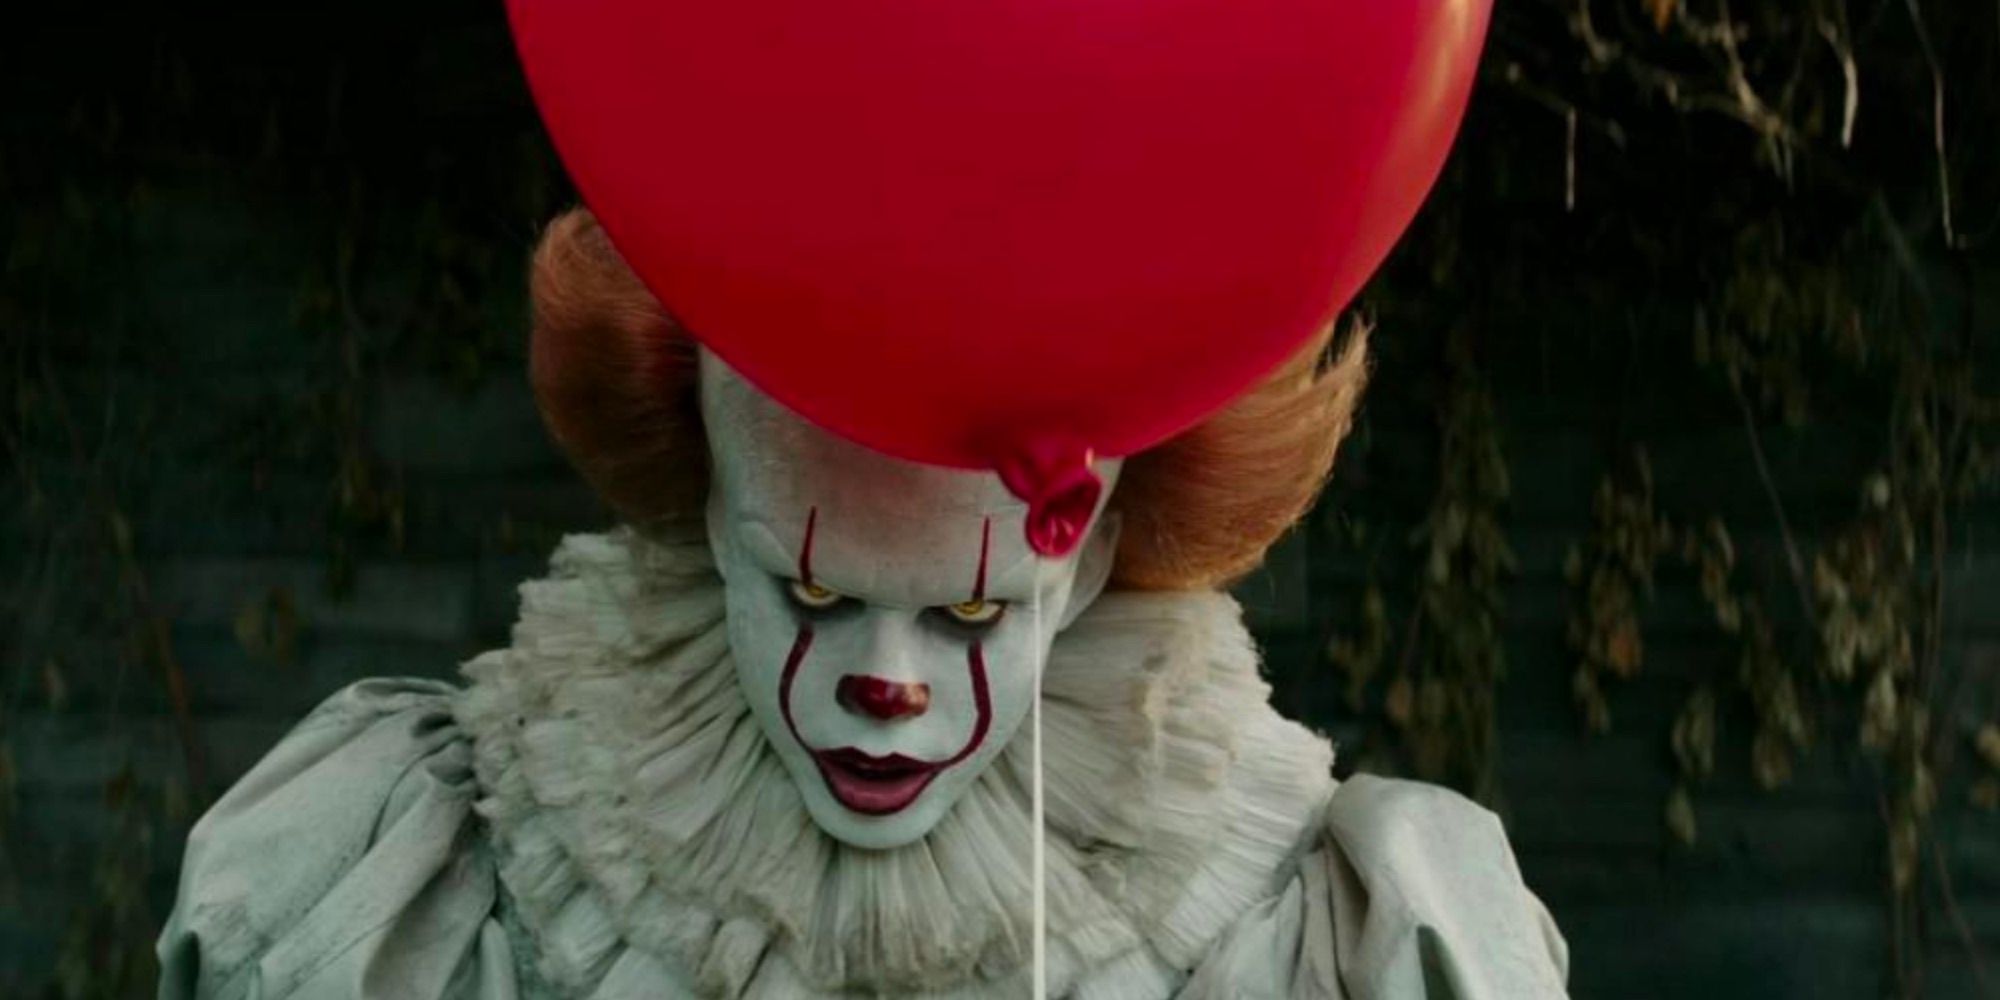 Pennywise the Clown in Stephen King's IT (2017).